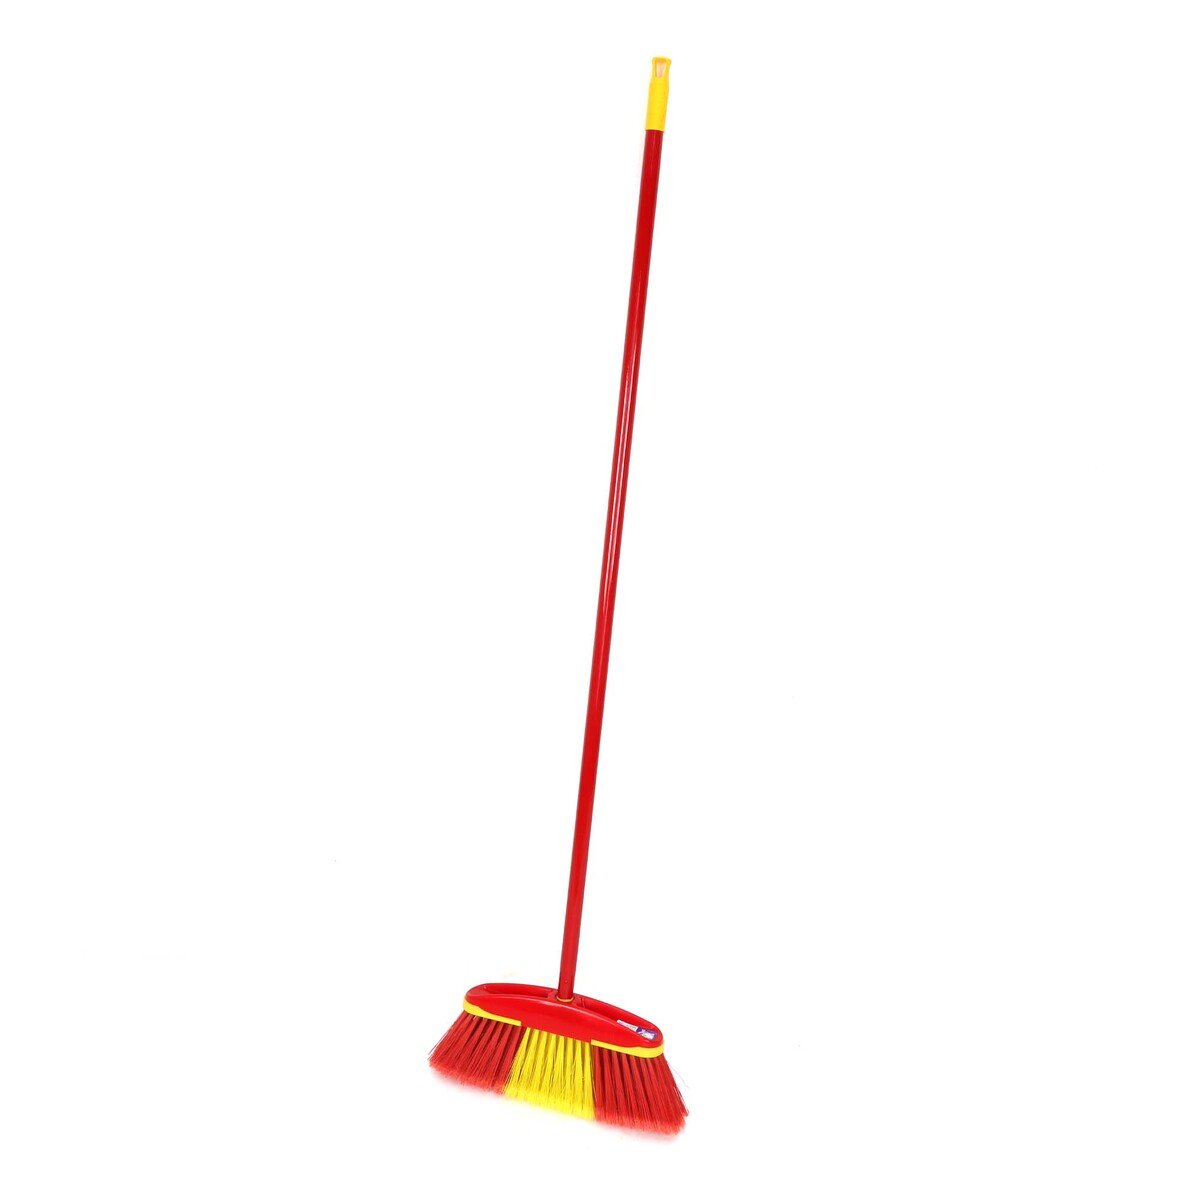 Mr.Brush 01000460012 active Soft Broom with long Stick, Assorted colors